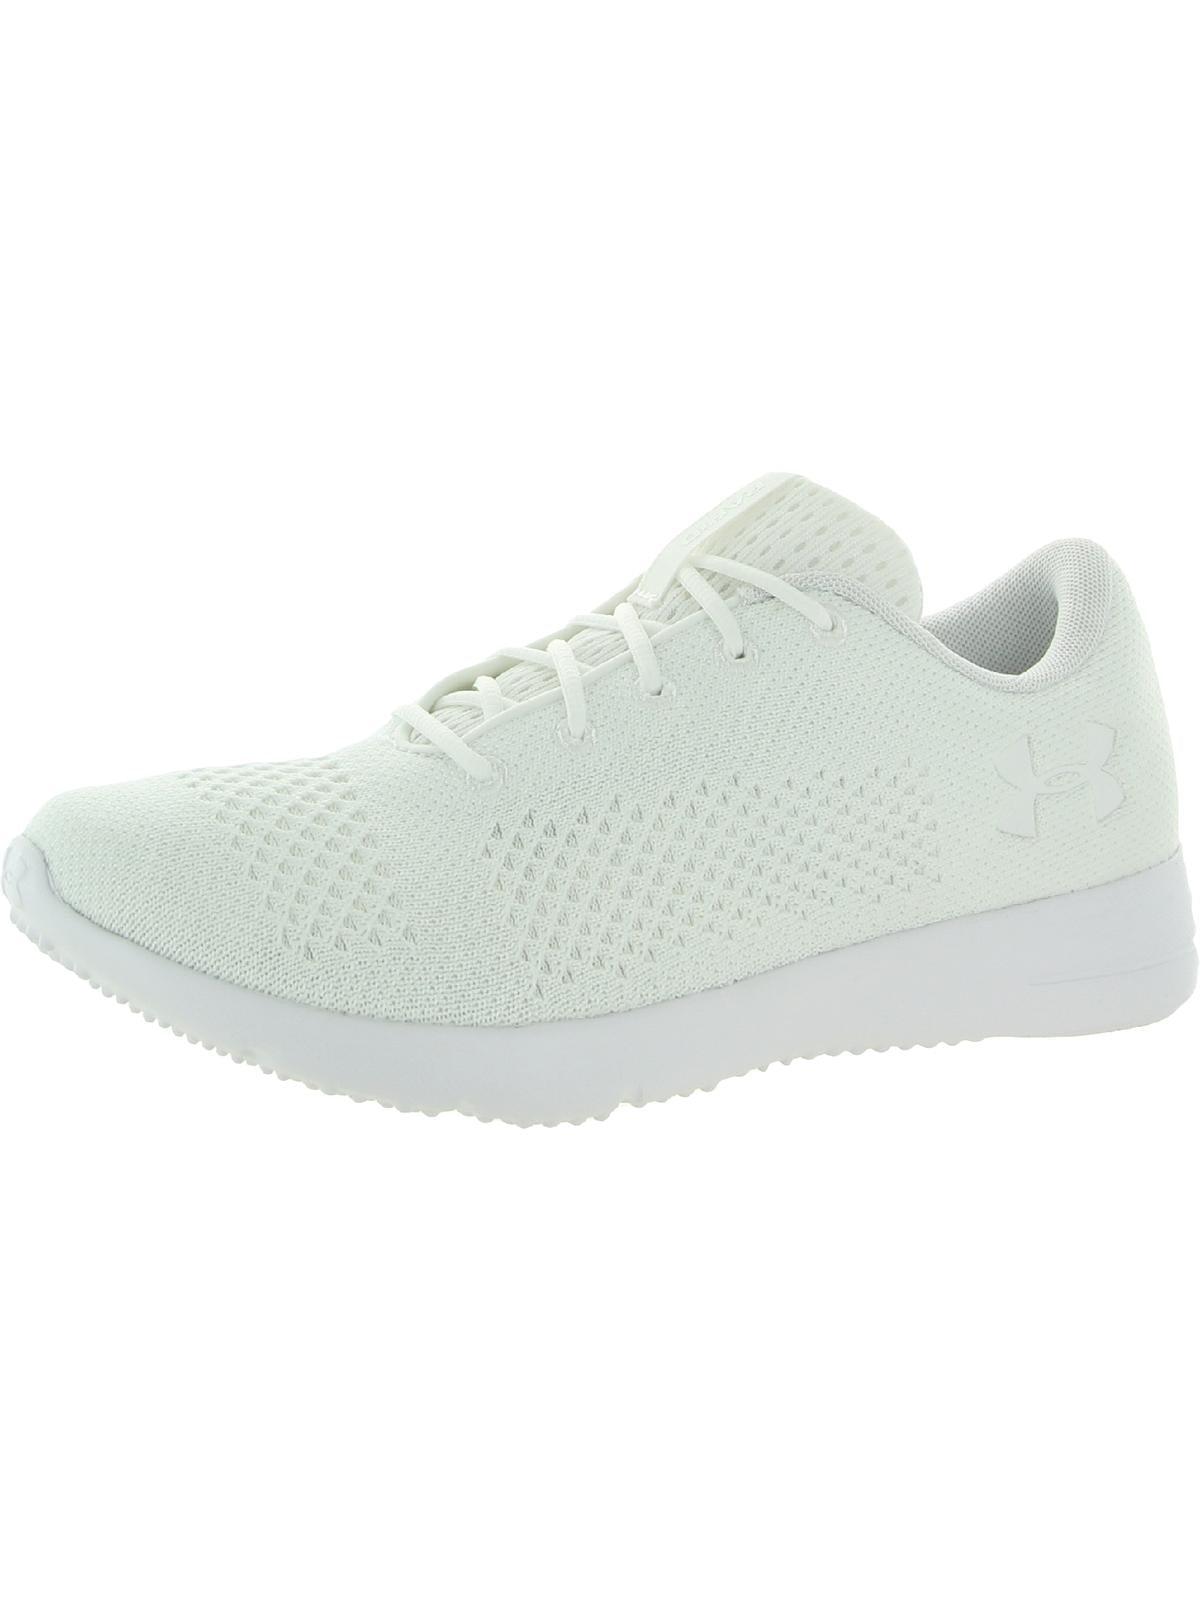 Under Armour Rapid Lightweight Flexible Running Shoes in White | Lyst